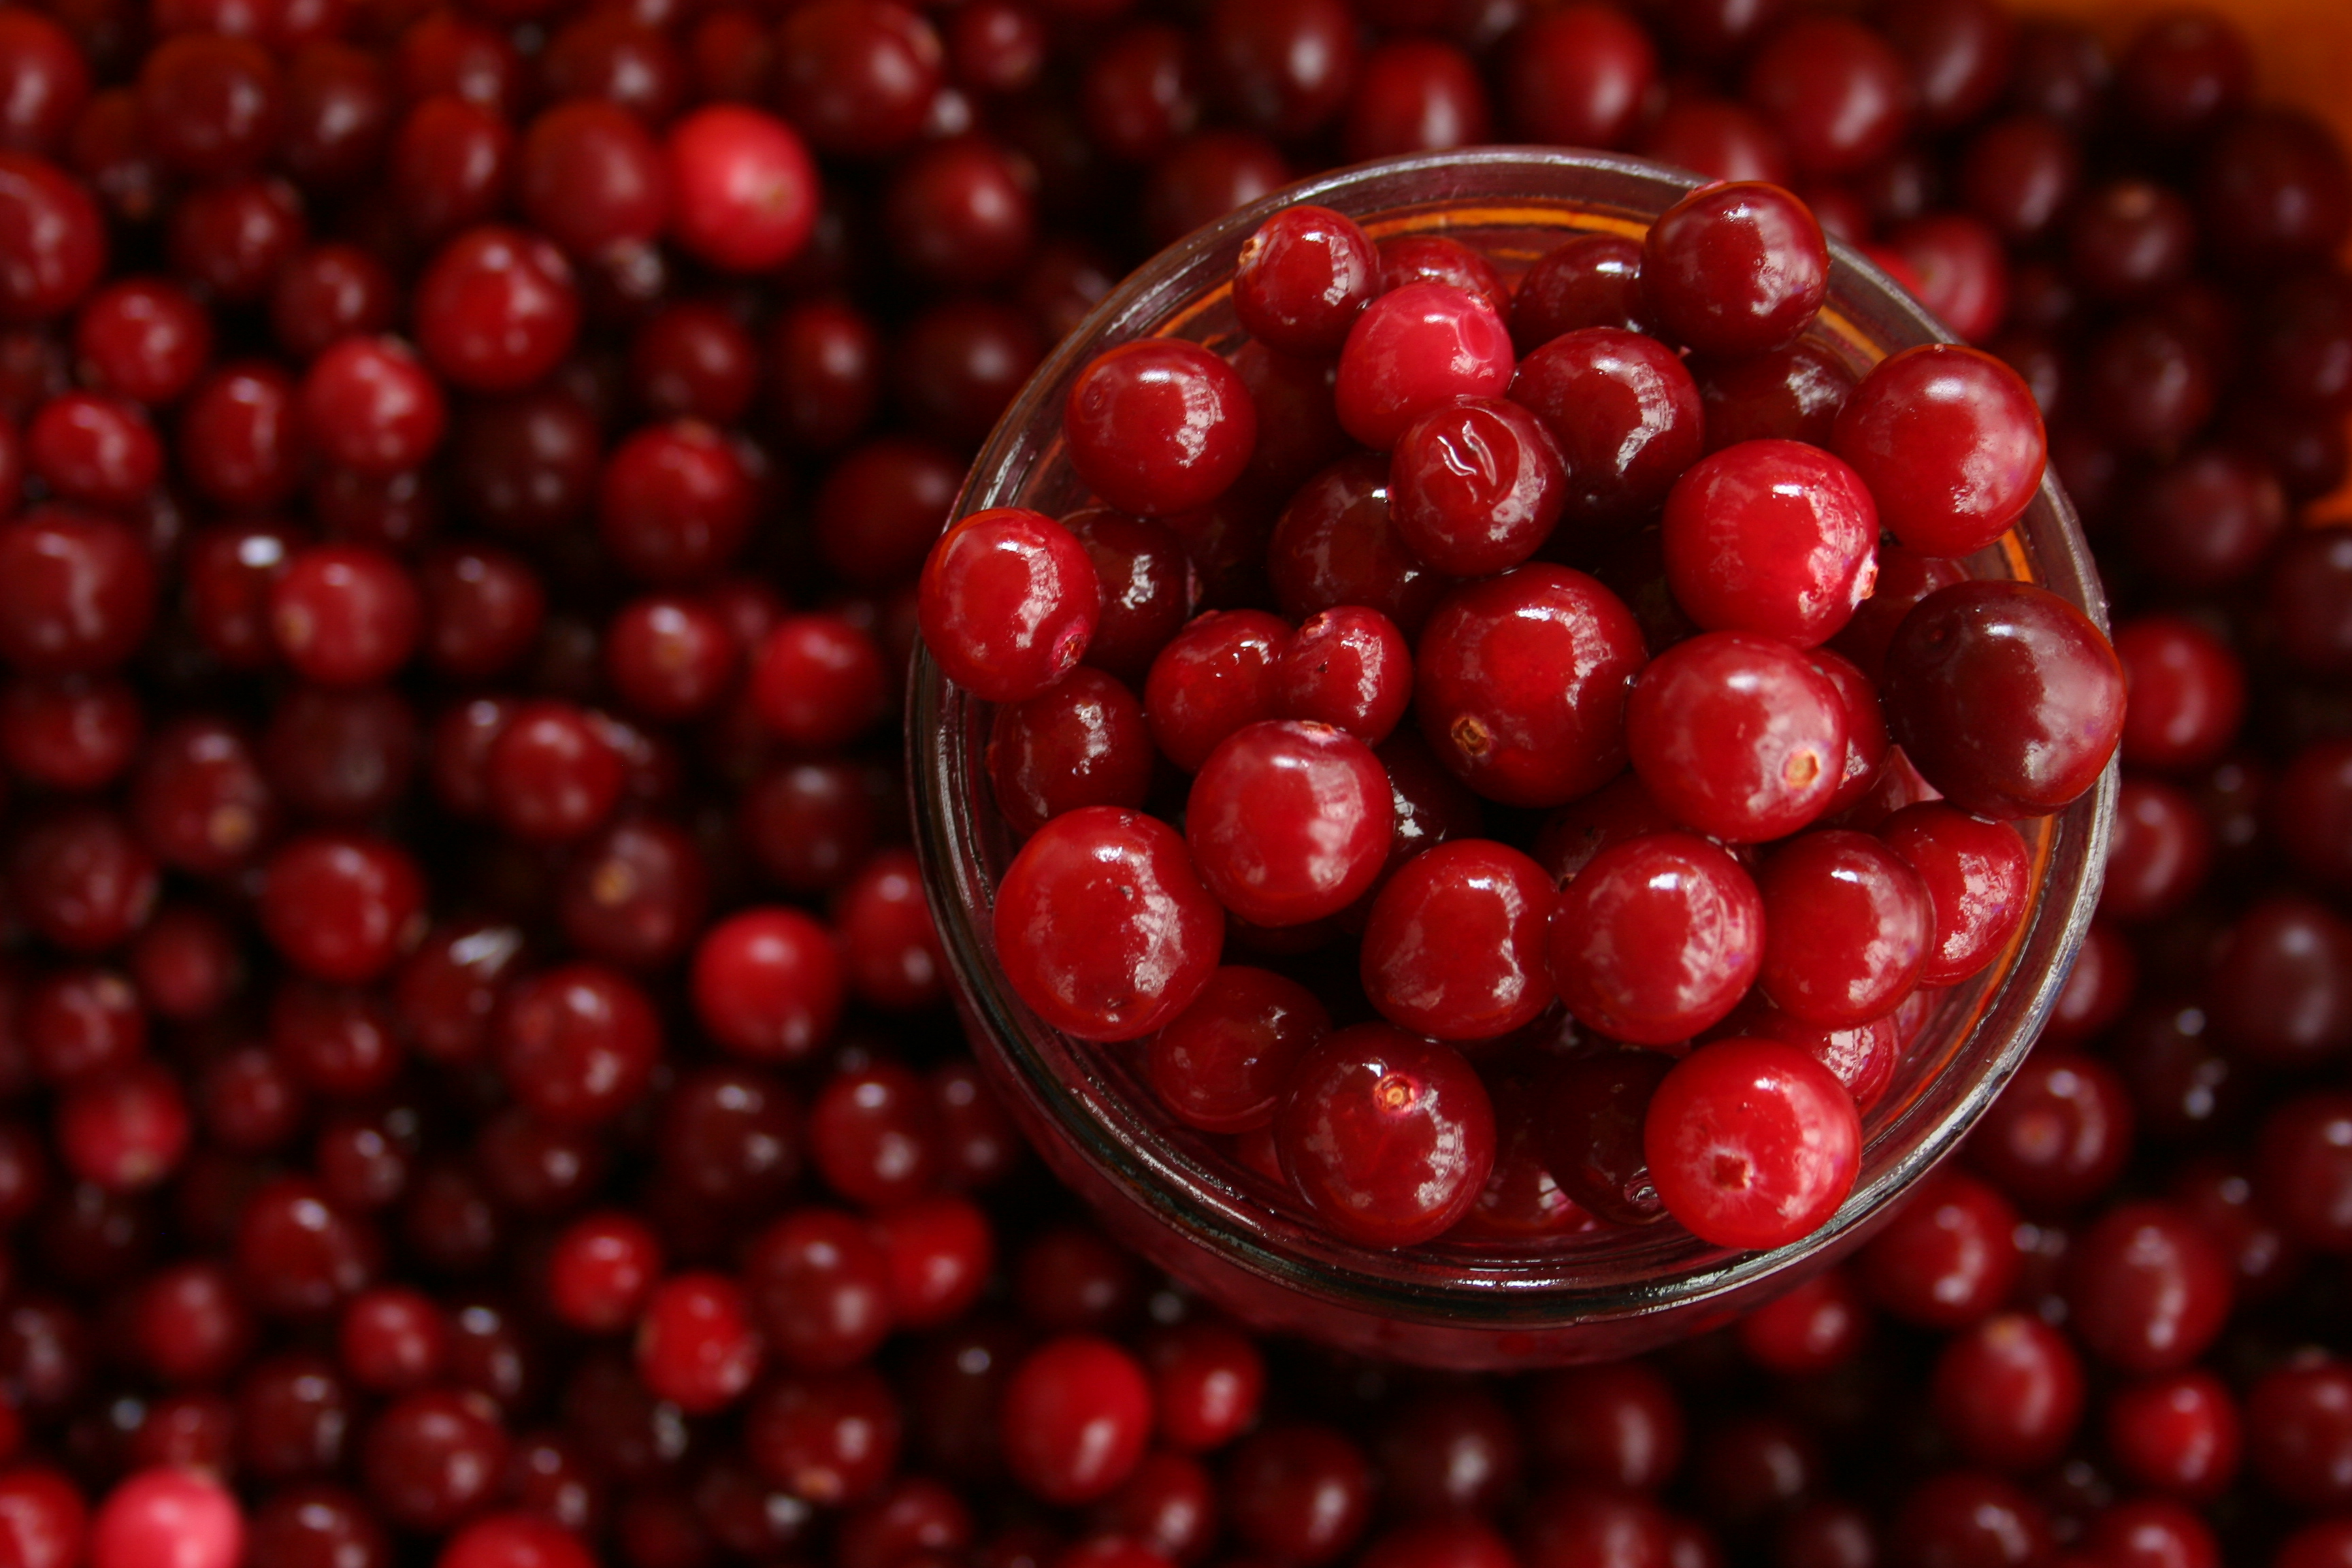 Cranberry HD Wallpaper  Background Image  3456x2304  ID 794947  Wallpaper Abyss